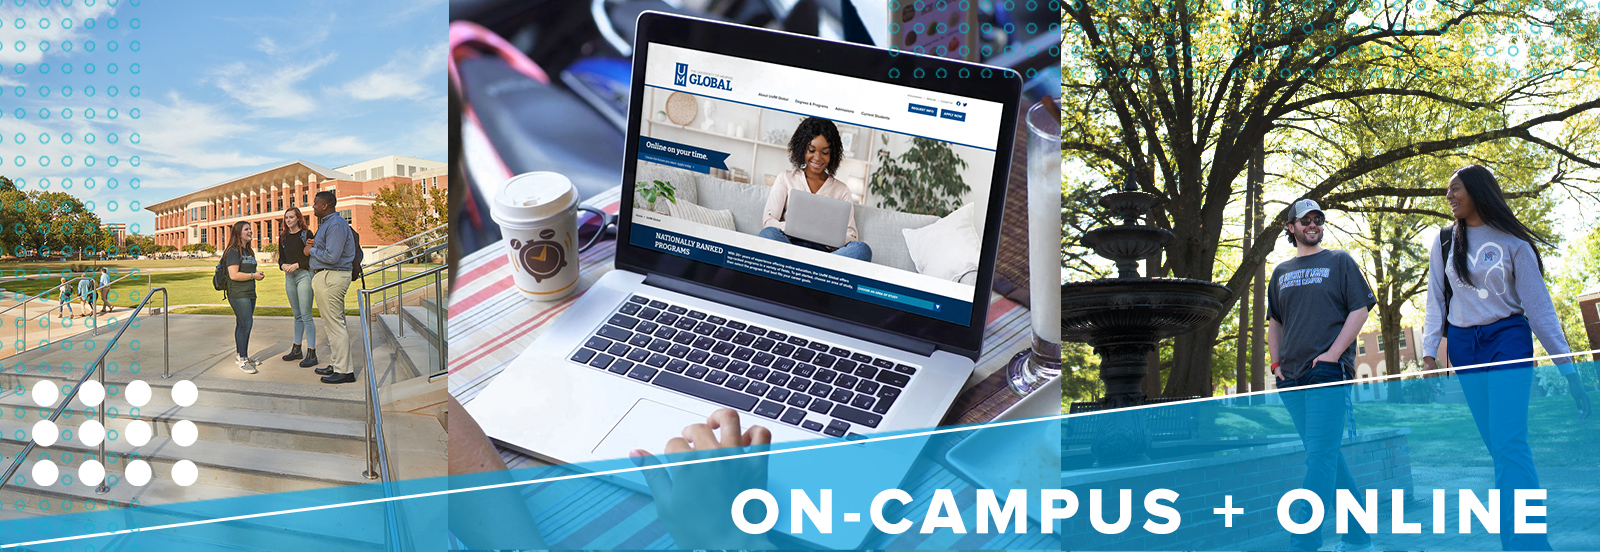 On-Campus + Online (image of Central campus, Global website on laptop and Lambuth campus